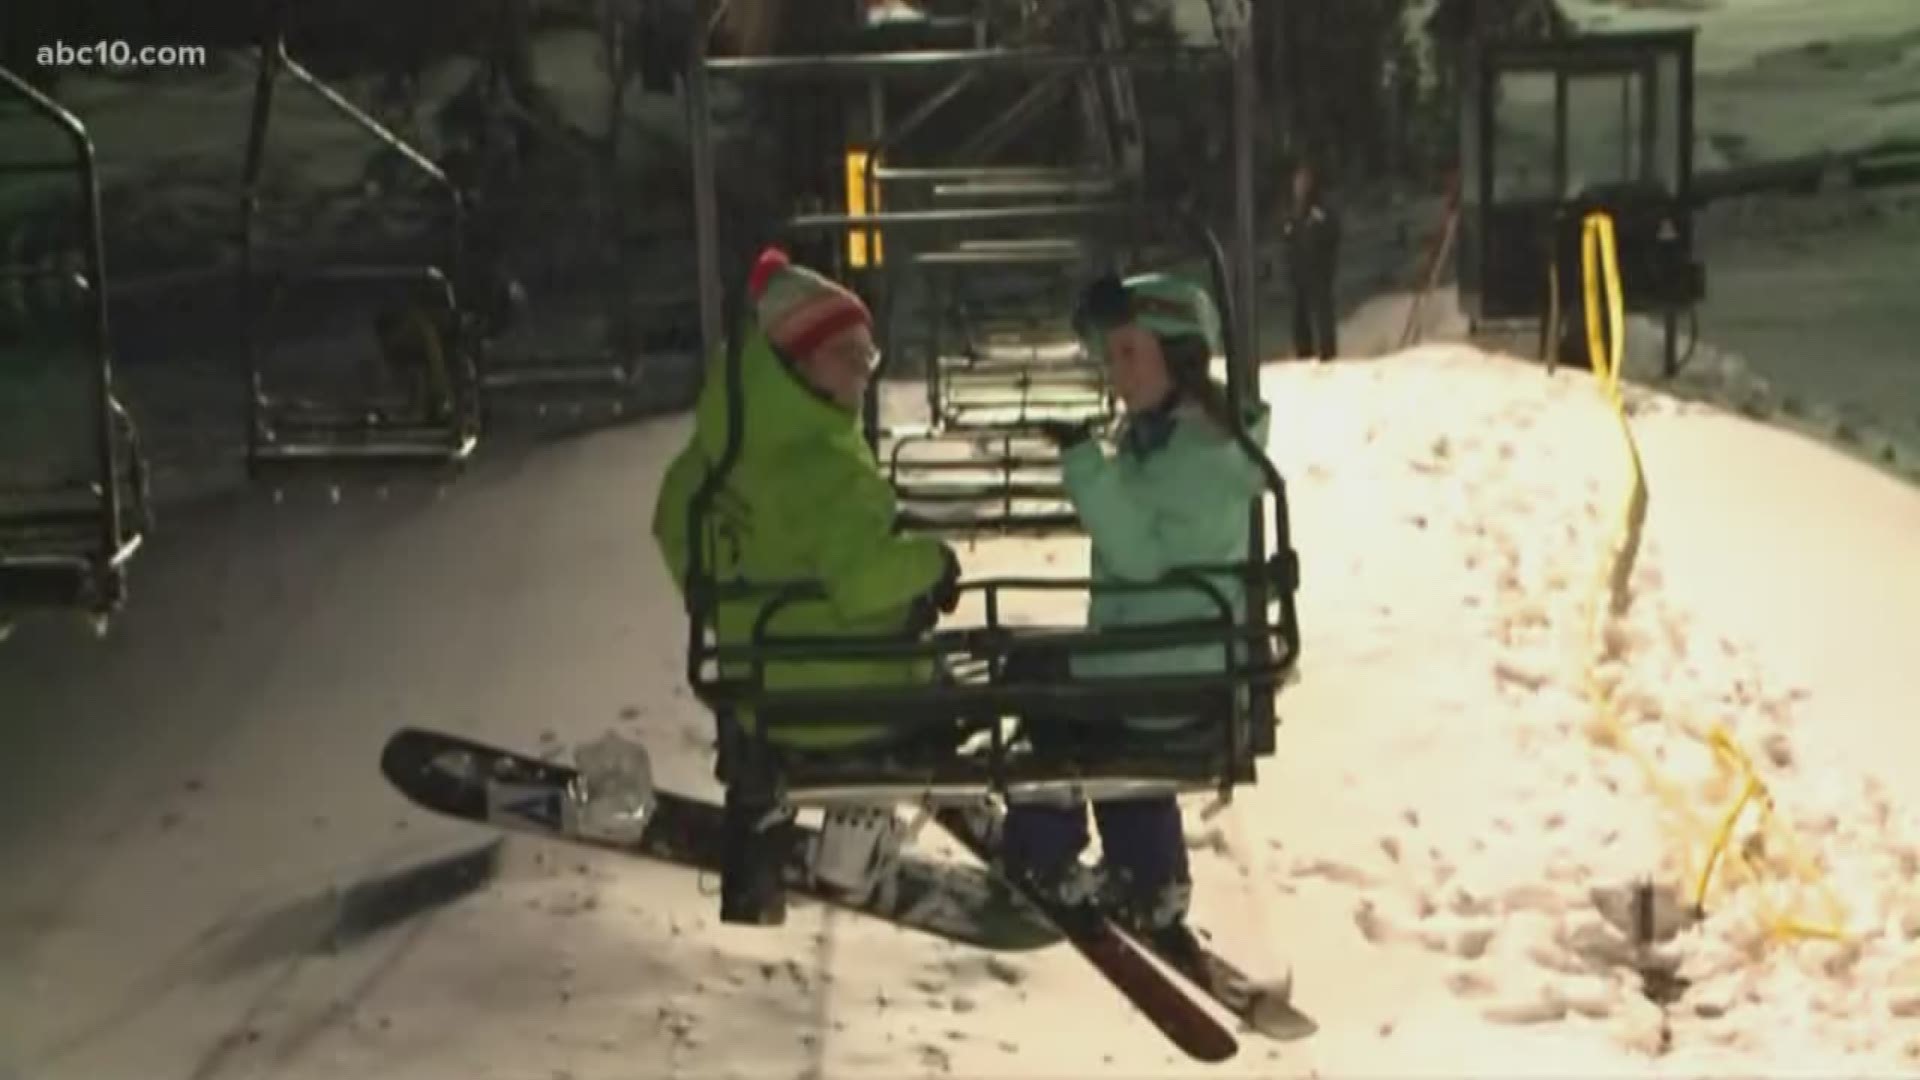 Dina Kupfer was one of the first to take part of Boreal Mountain Resort's first ski lifts.